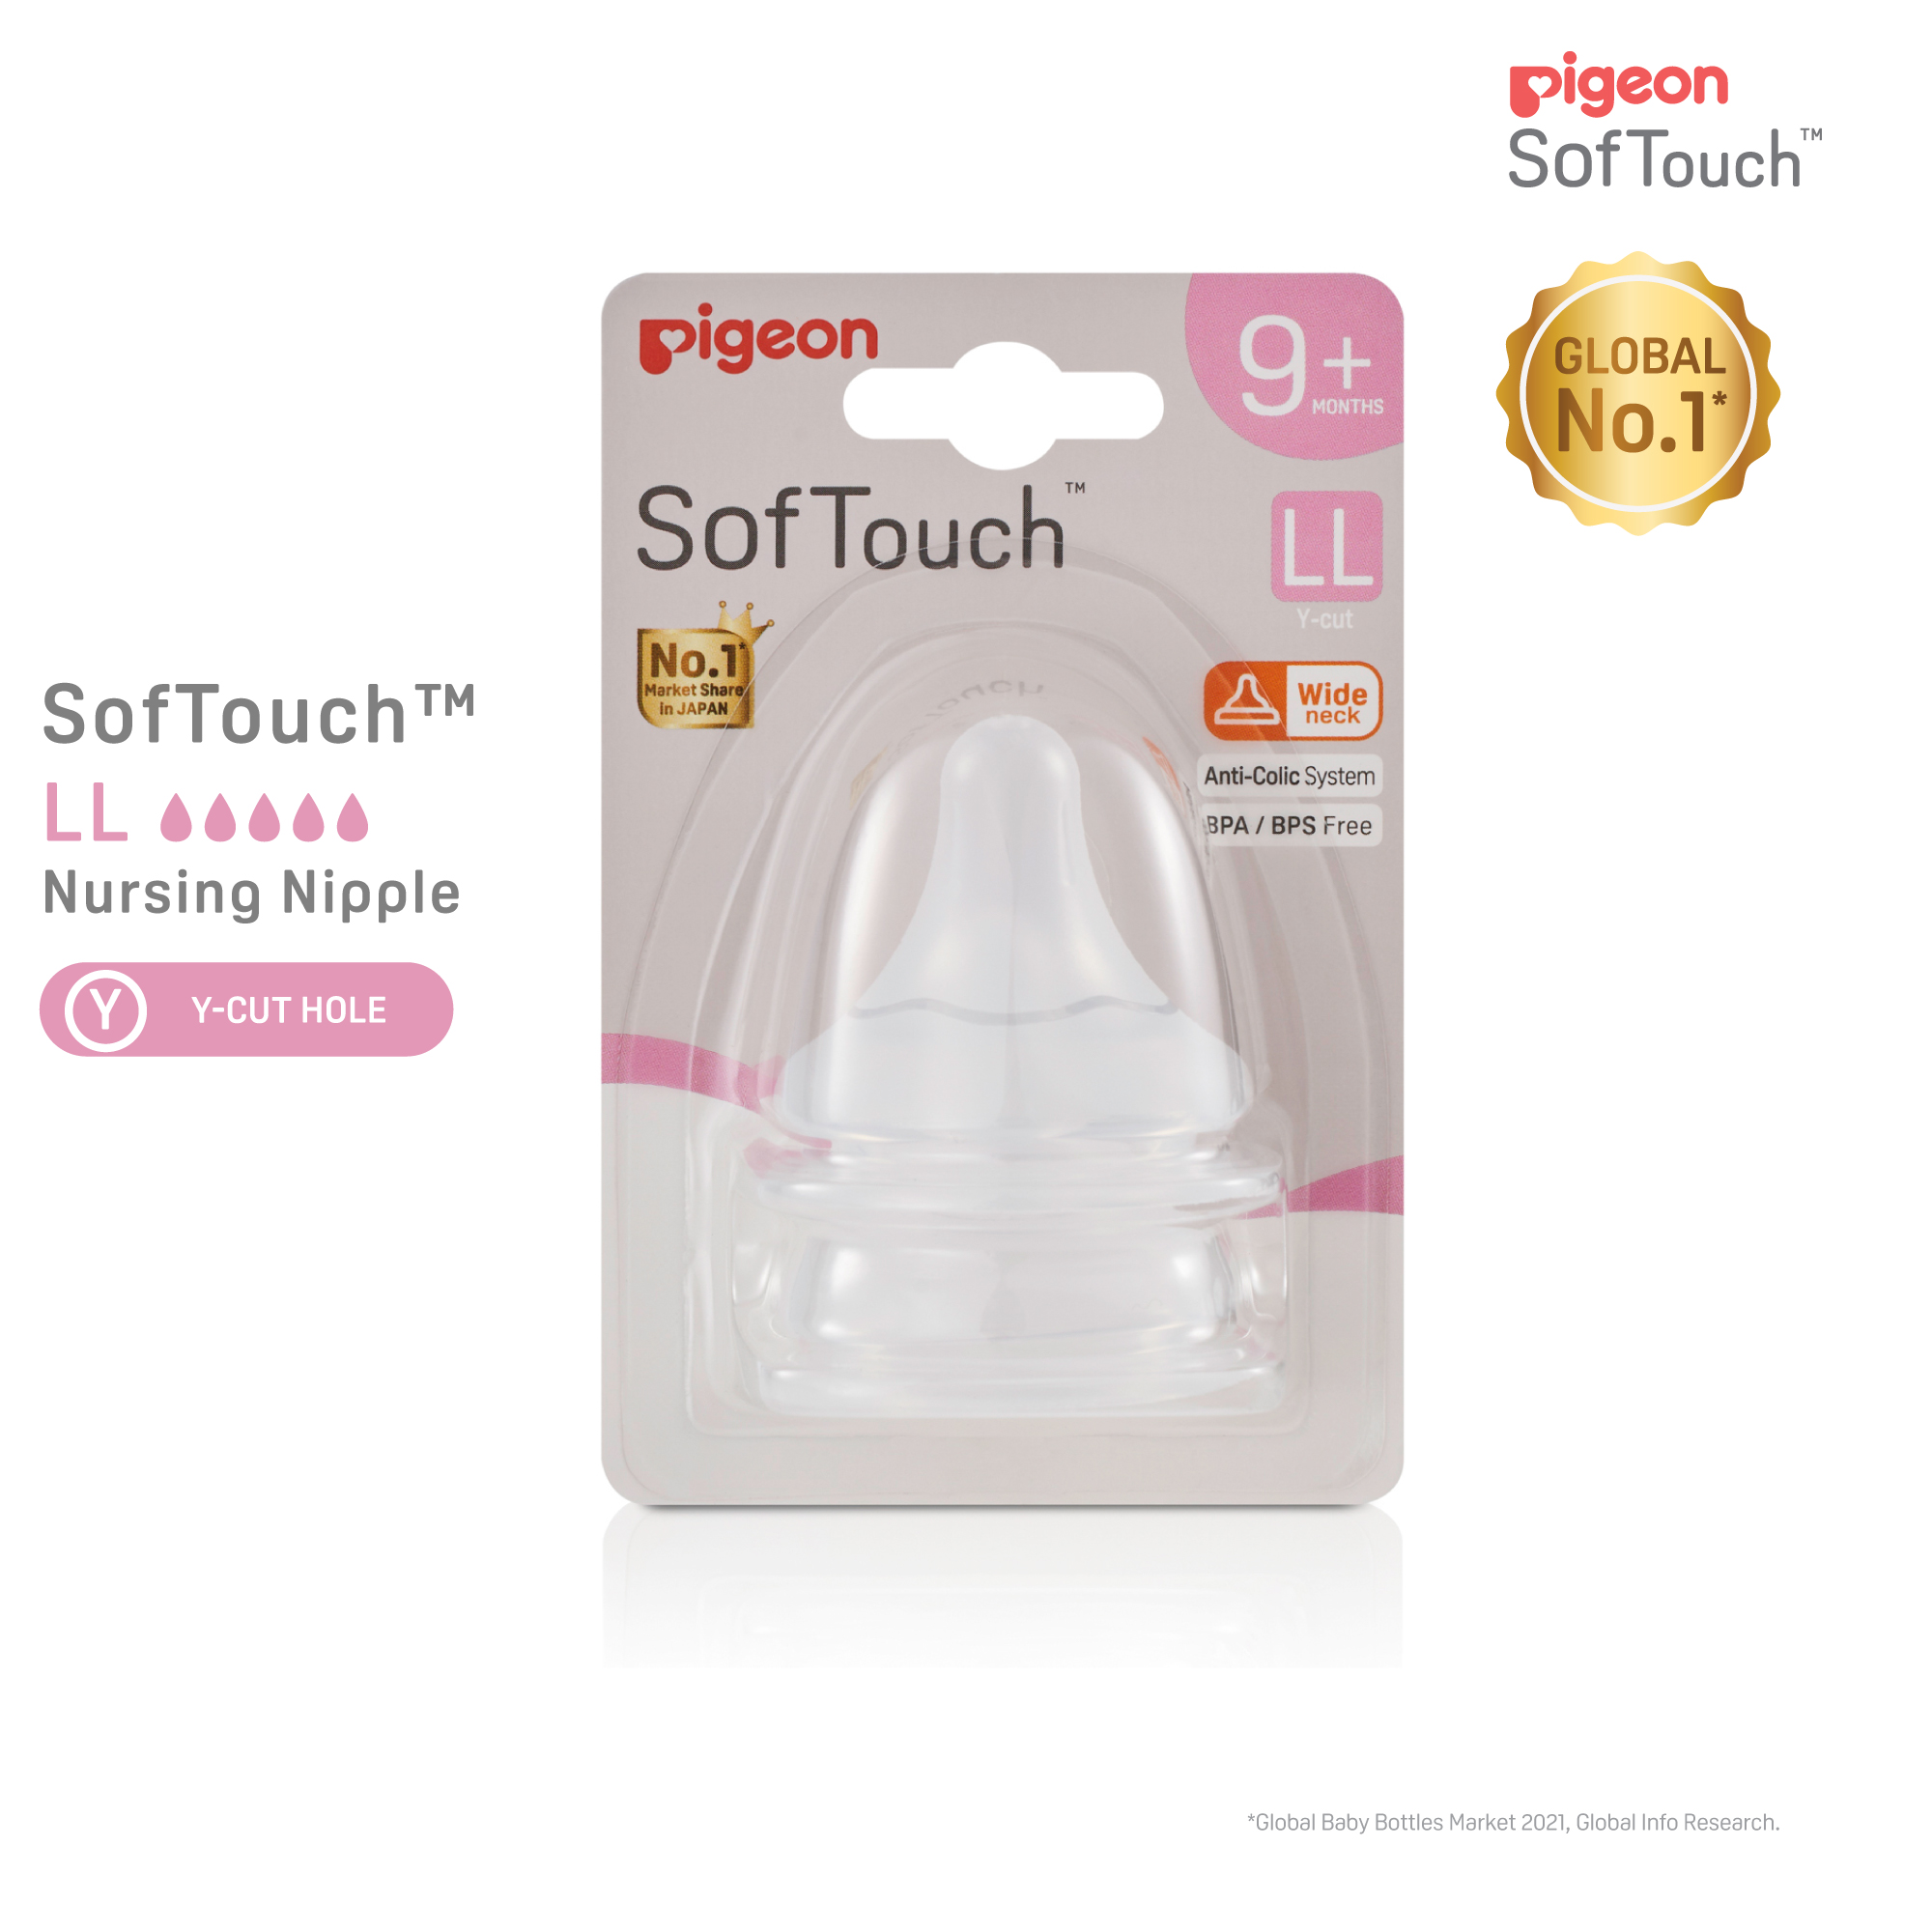 Pigeon SofTouch 3 Nipple Blister Pack 2pcs (LL) (PG-79465)